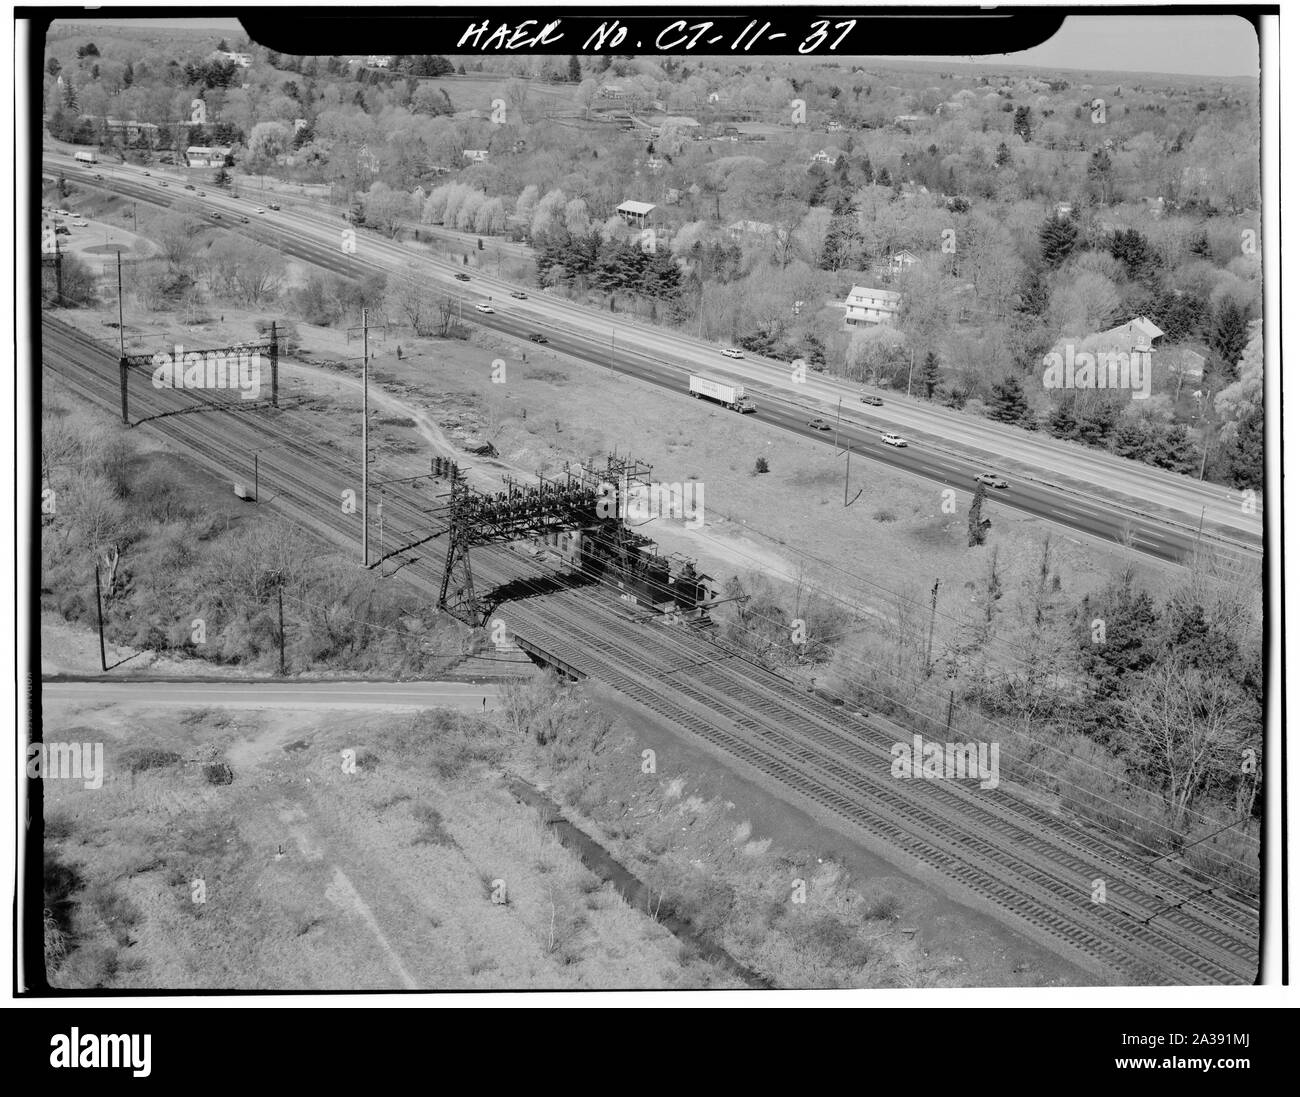 Saga Interlocking Tower. Greens Farms, Fairfield Co., CT. Sec. 9108, MP 47.00. - Northeast Railroad Corridor, Amtrak Route between New York-Connecticut and Connecticut-Rhode Island State Lines, New Haven, New Haven County, CT; Stock Photo